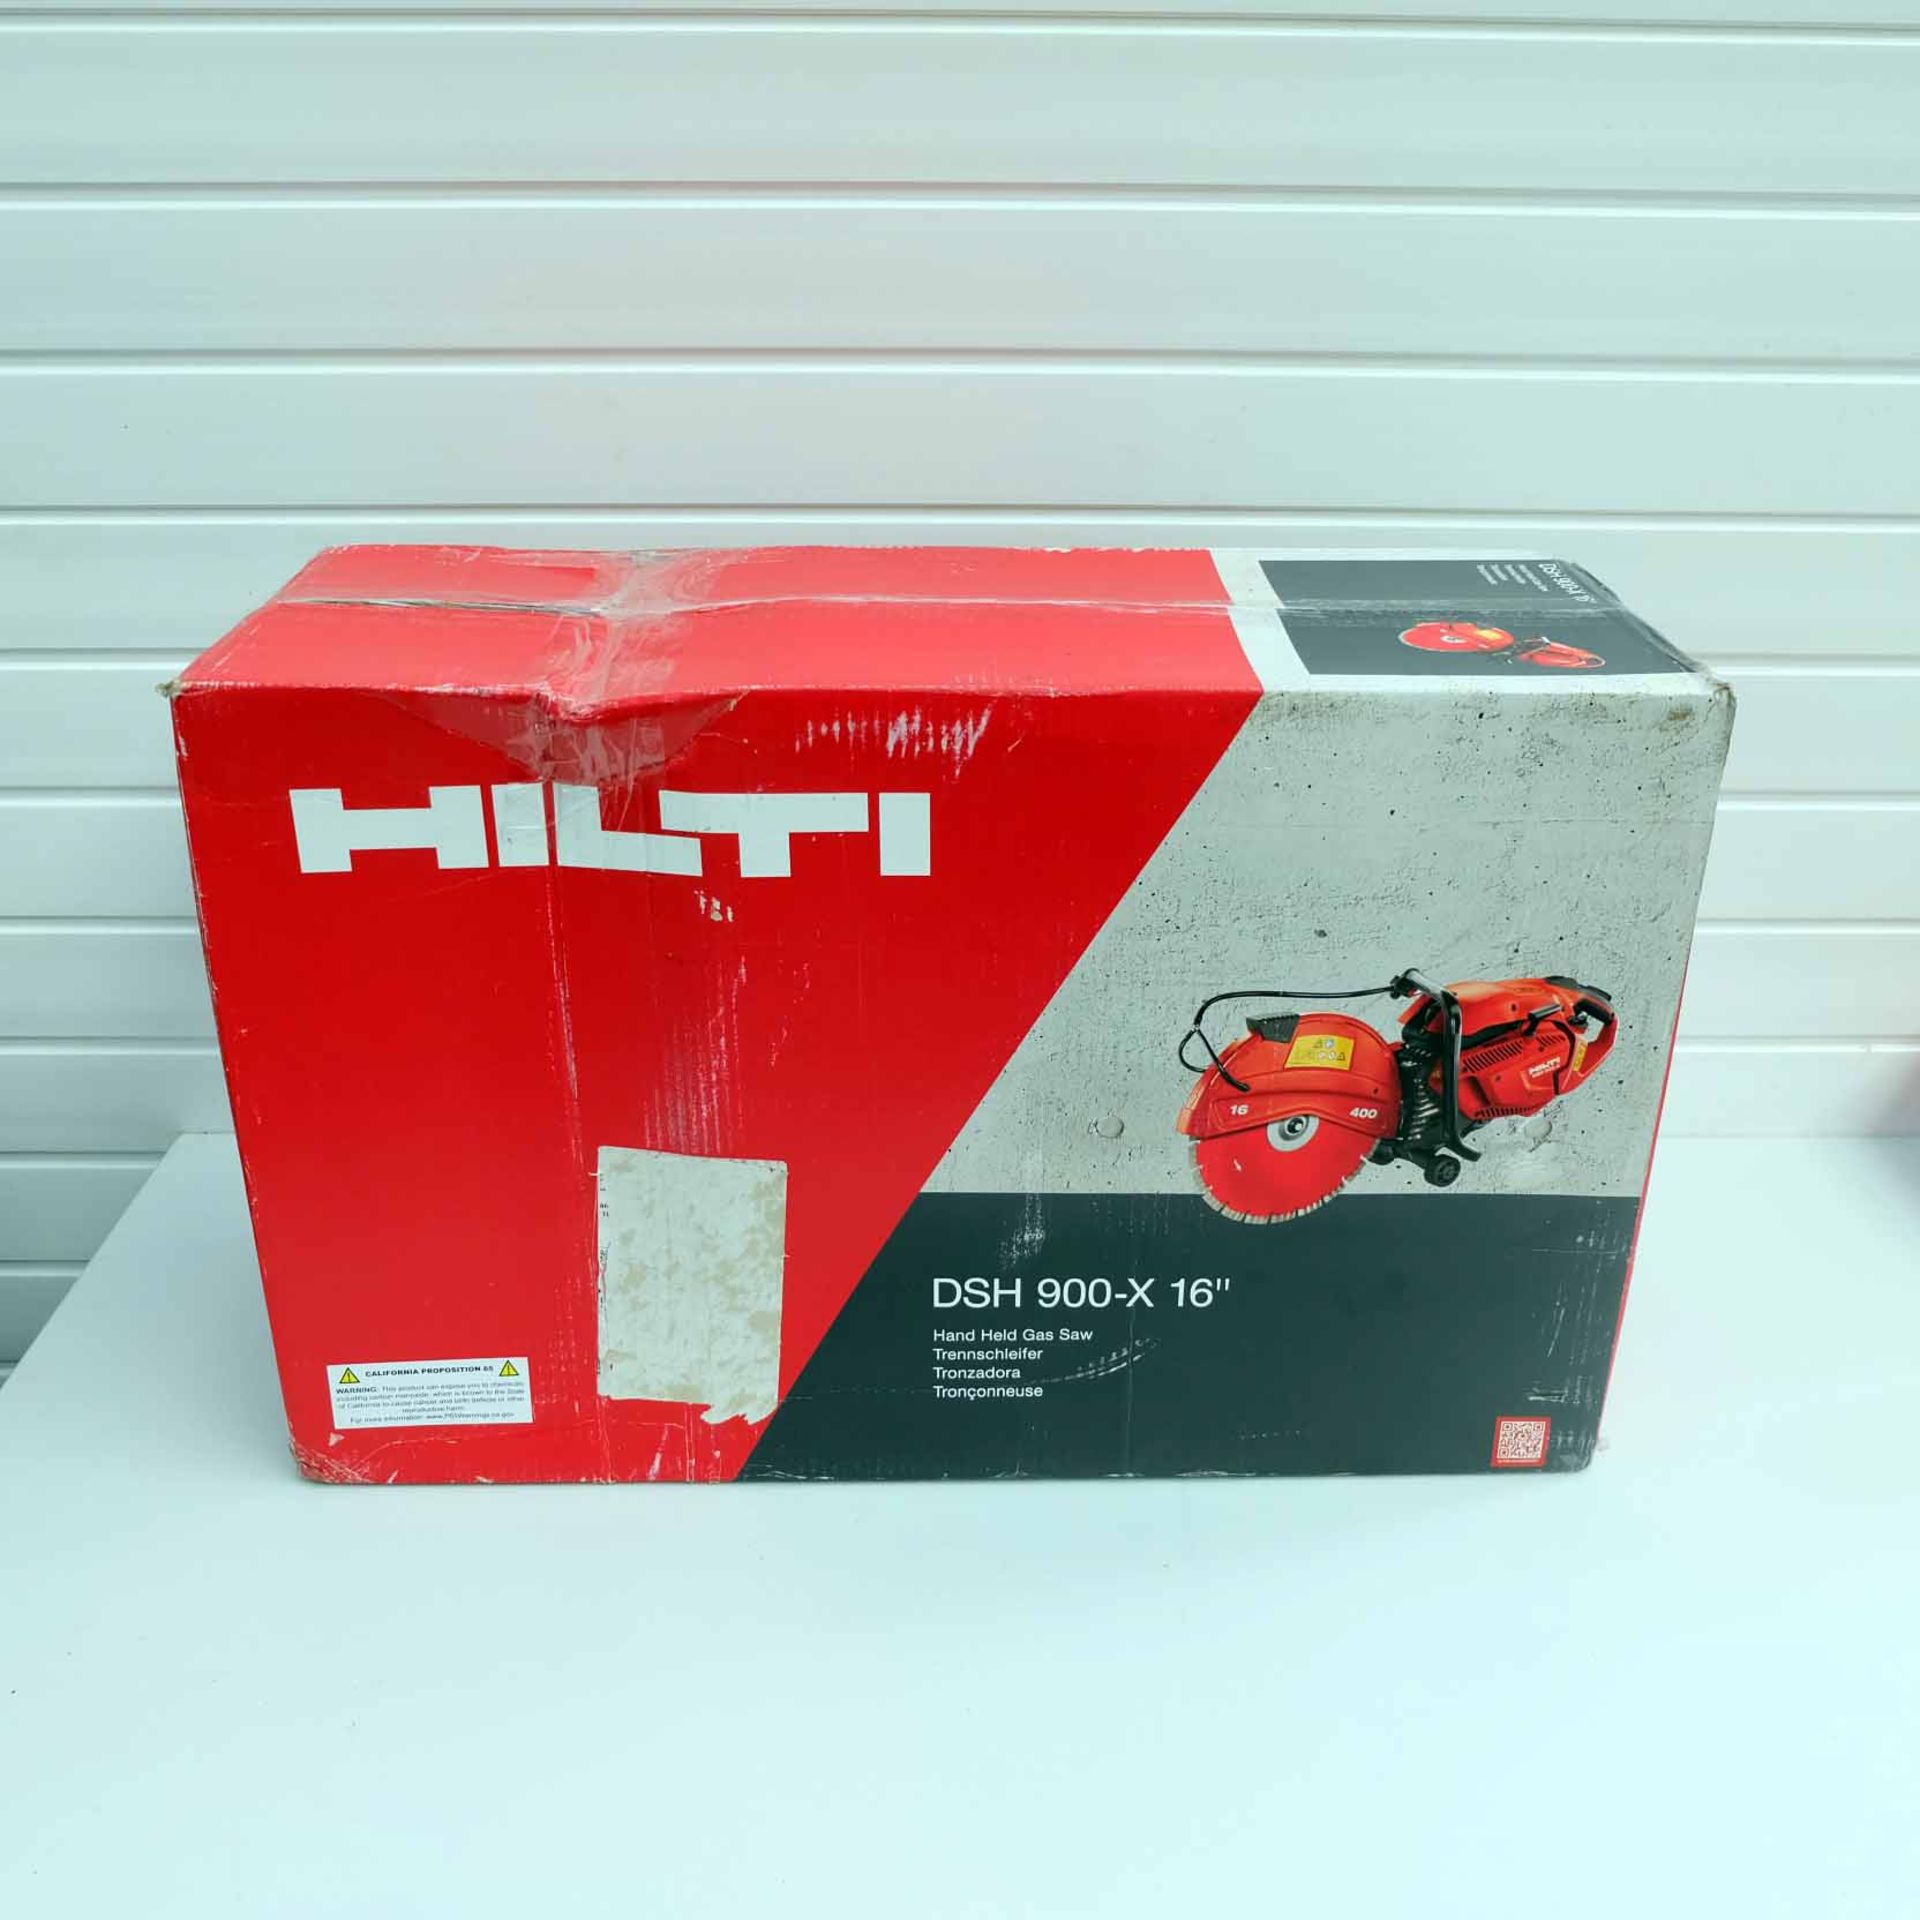 Hilti Hand Held Gas Saw. Model DSH 900-X 16". Complete With SP-16"x1" Blade. Easy Start Auto-Choke S - Image 22 of 22